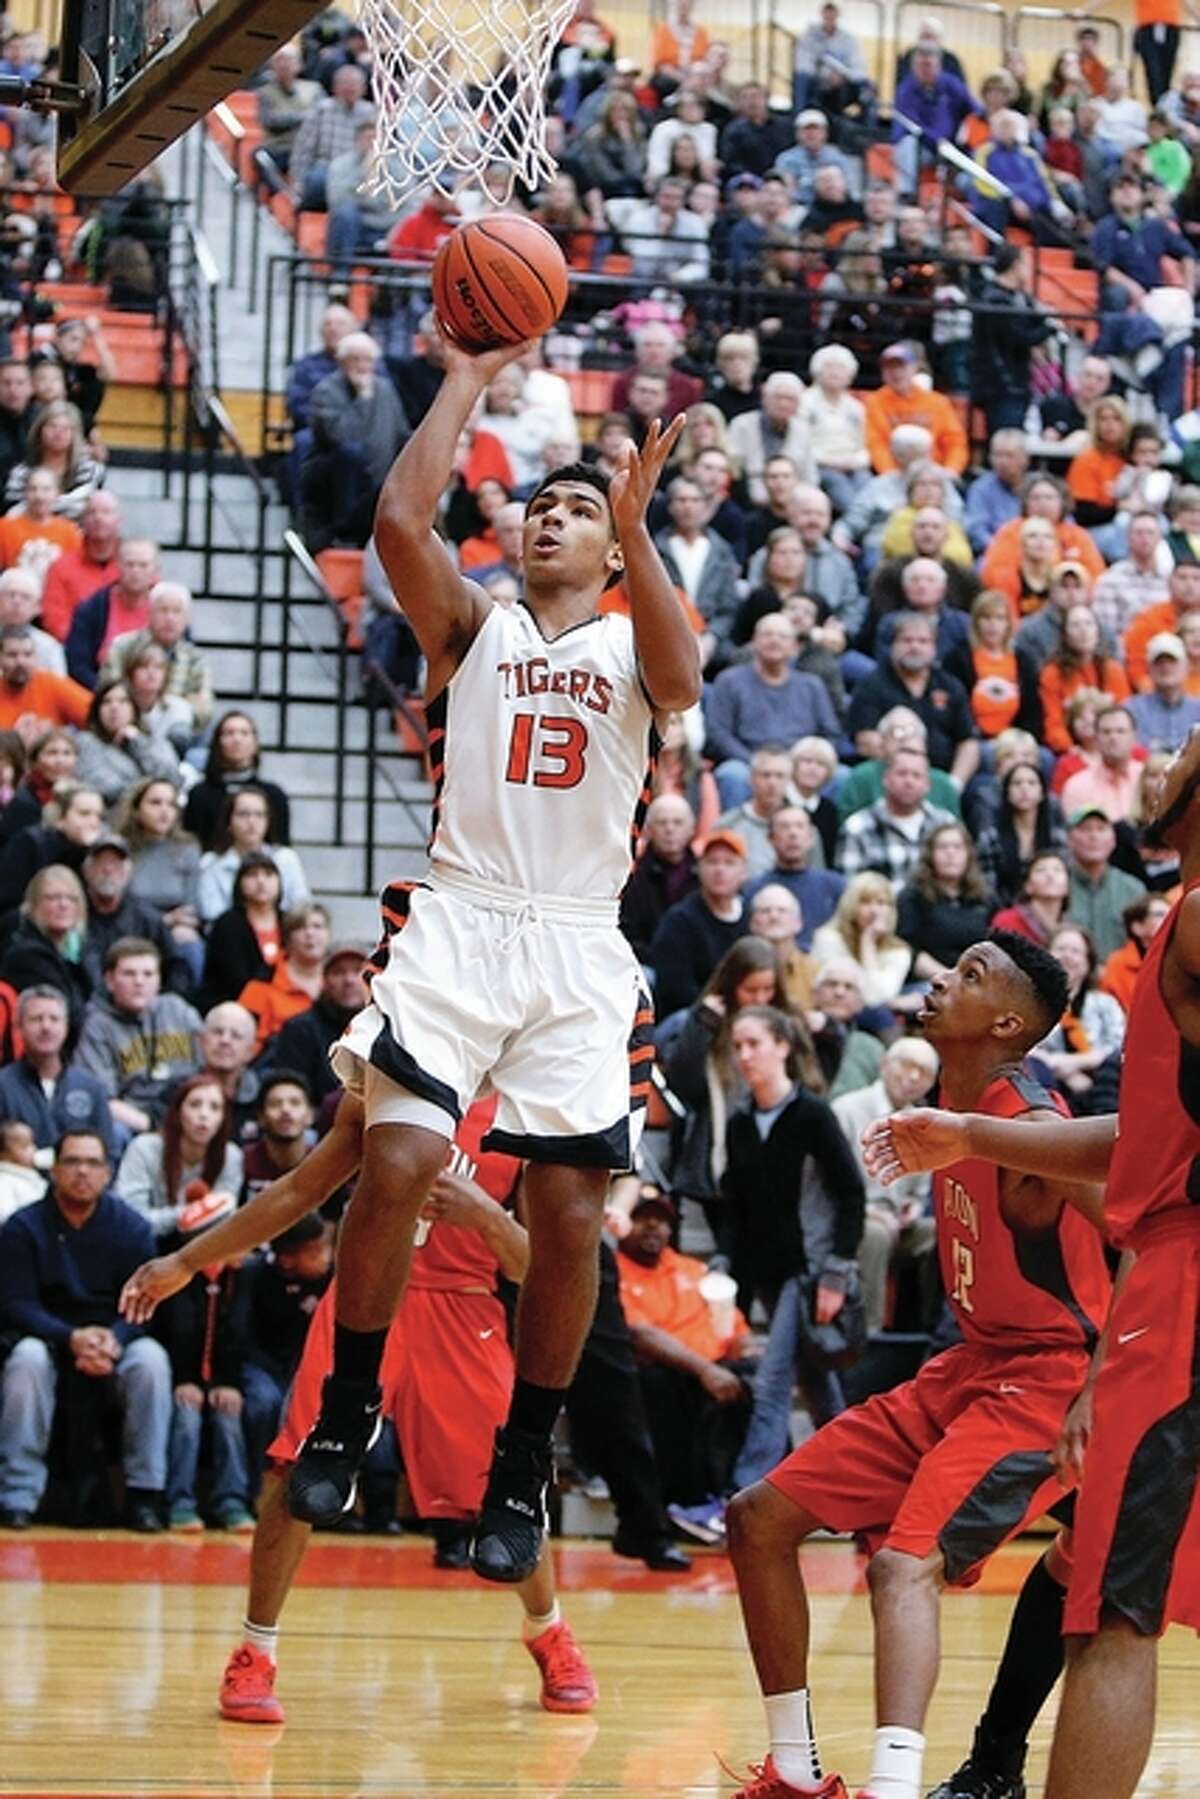 Edwardsville’s Mark Smith (13), shown going up for two points in a Tigers win over Alton on Jan. 15 in Edwardsville, had 29 points and 11 rebounds Friday night to lead his team to a semifinal victory at the Salem Tournament.